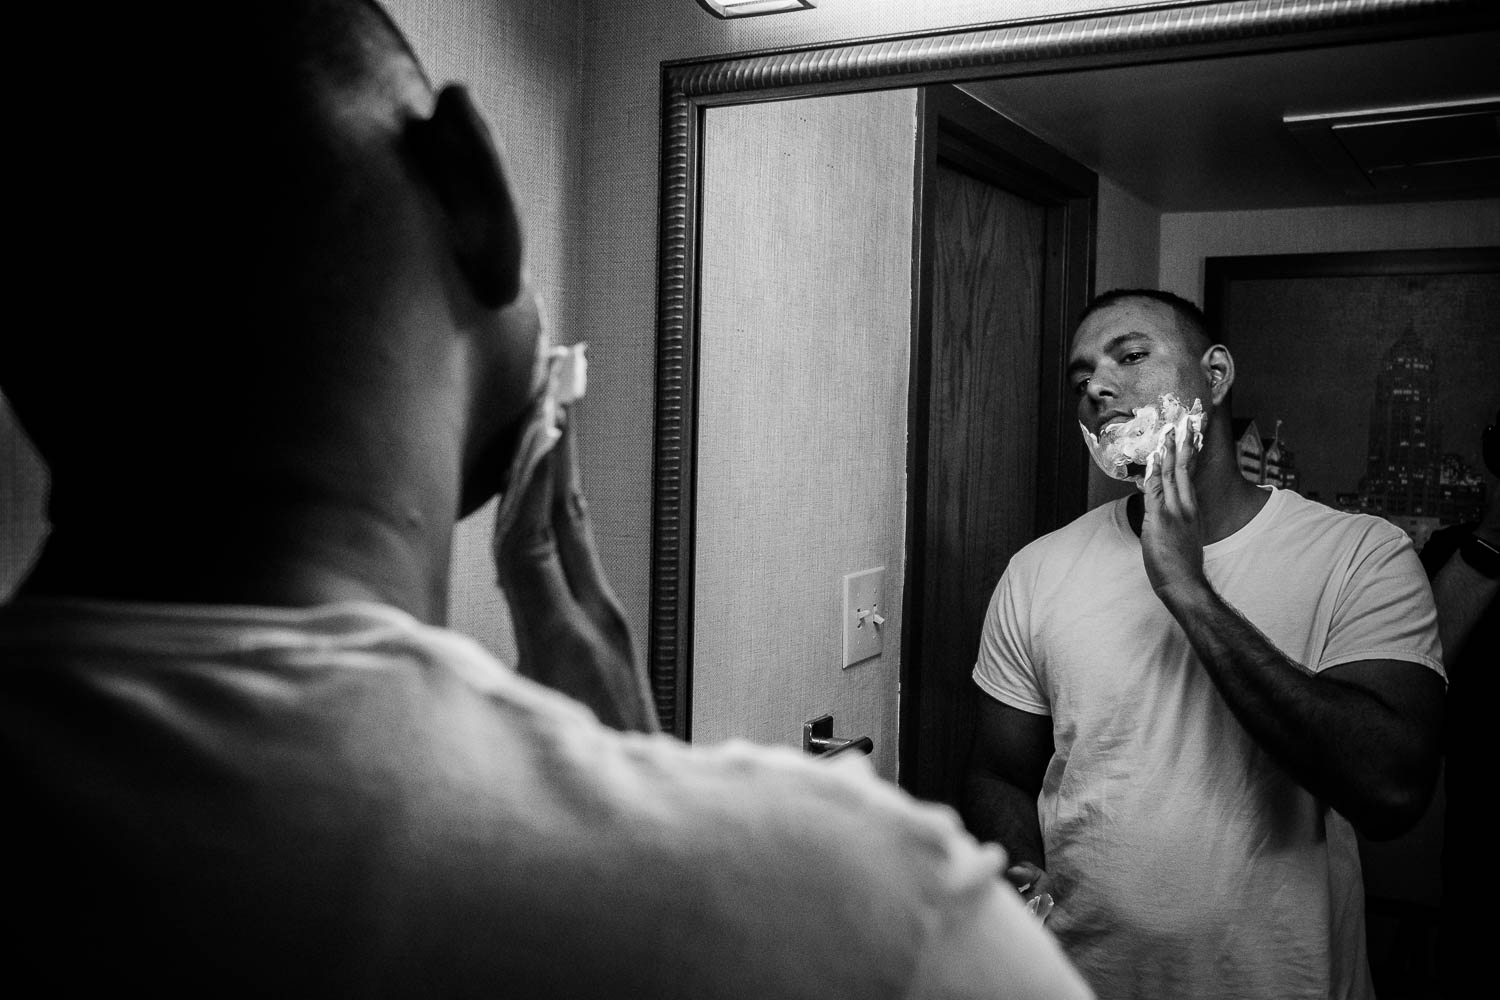 The groom applies shaving cream to his face as he gets ready for his wedding day